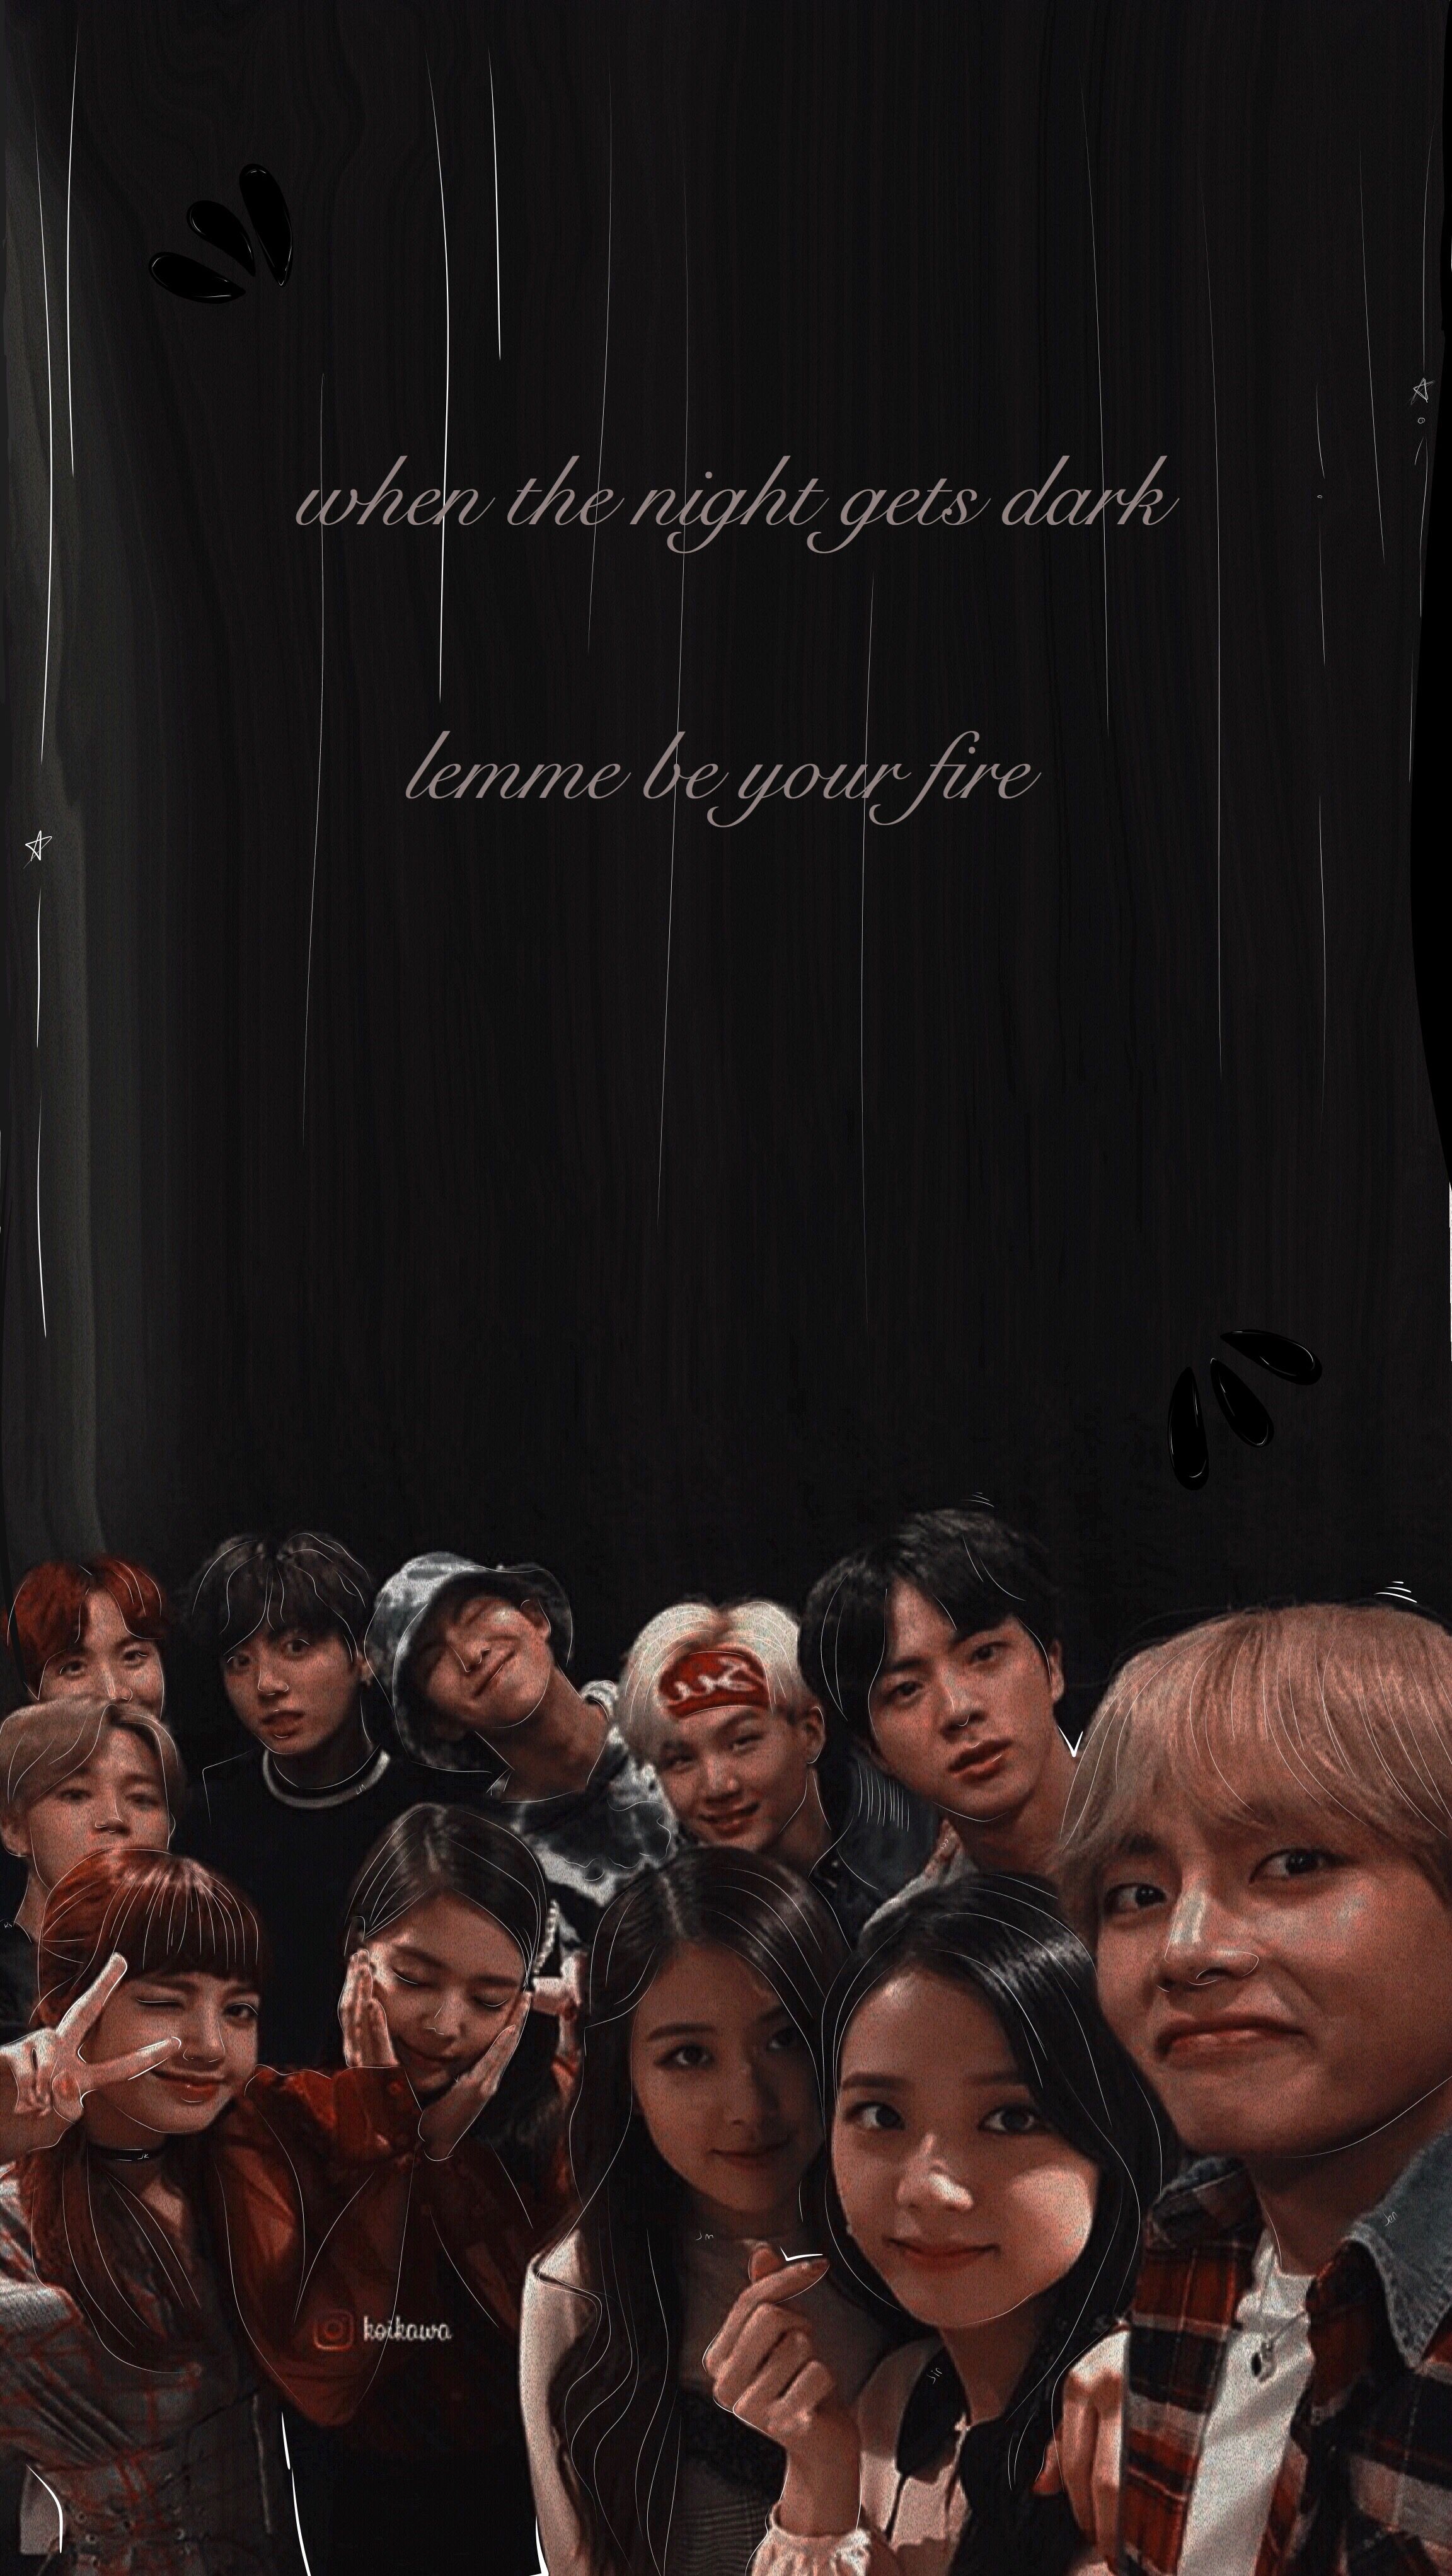 Bts And Blackpink Wallpapers